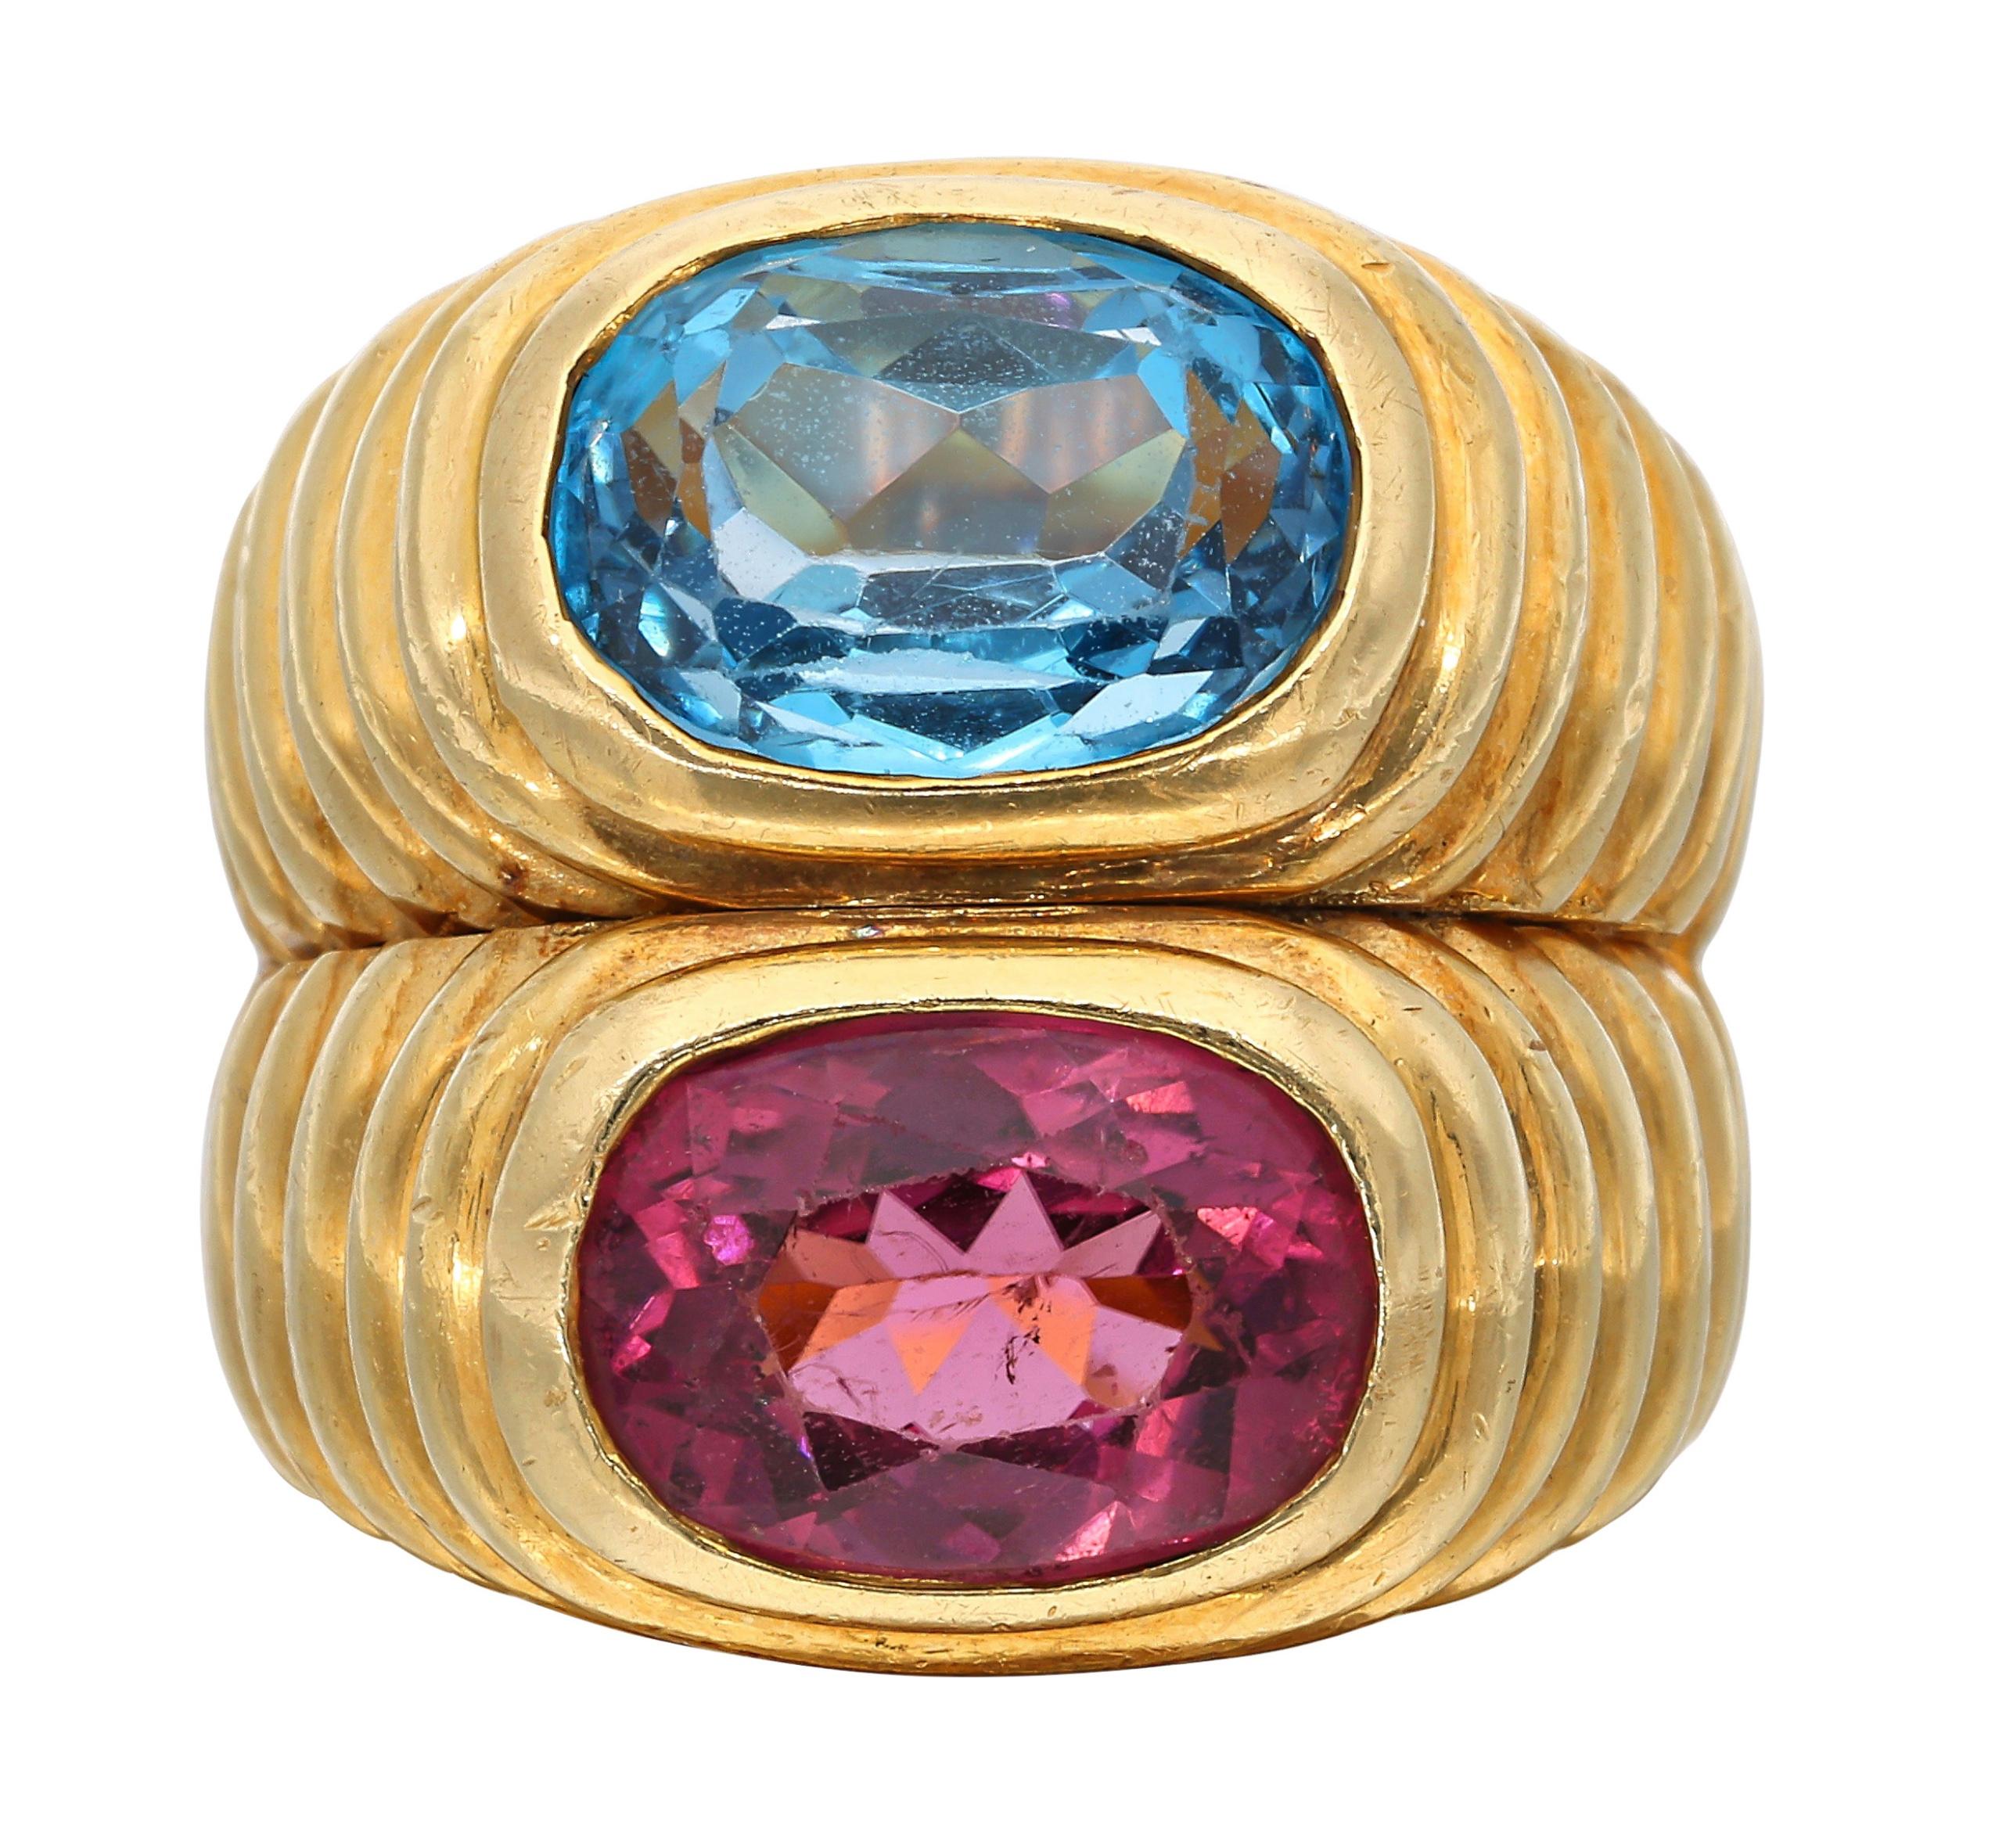 This playful ring features one oval shaped topaz and one oval shaped tourmaline.

- Topaz weighs approximately 3.50 carats
- Tourmaline weighs approximately 3.00 carats
- 18 karat yellow gold
- Total weight 21.37 grams
- Size 6

The condition report